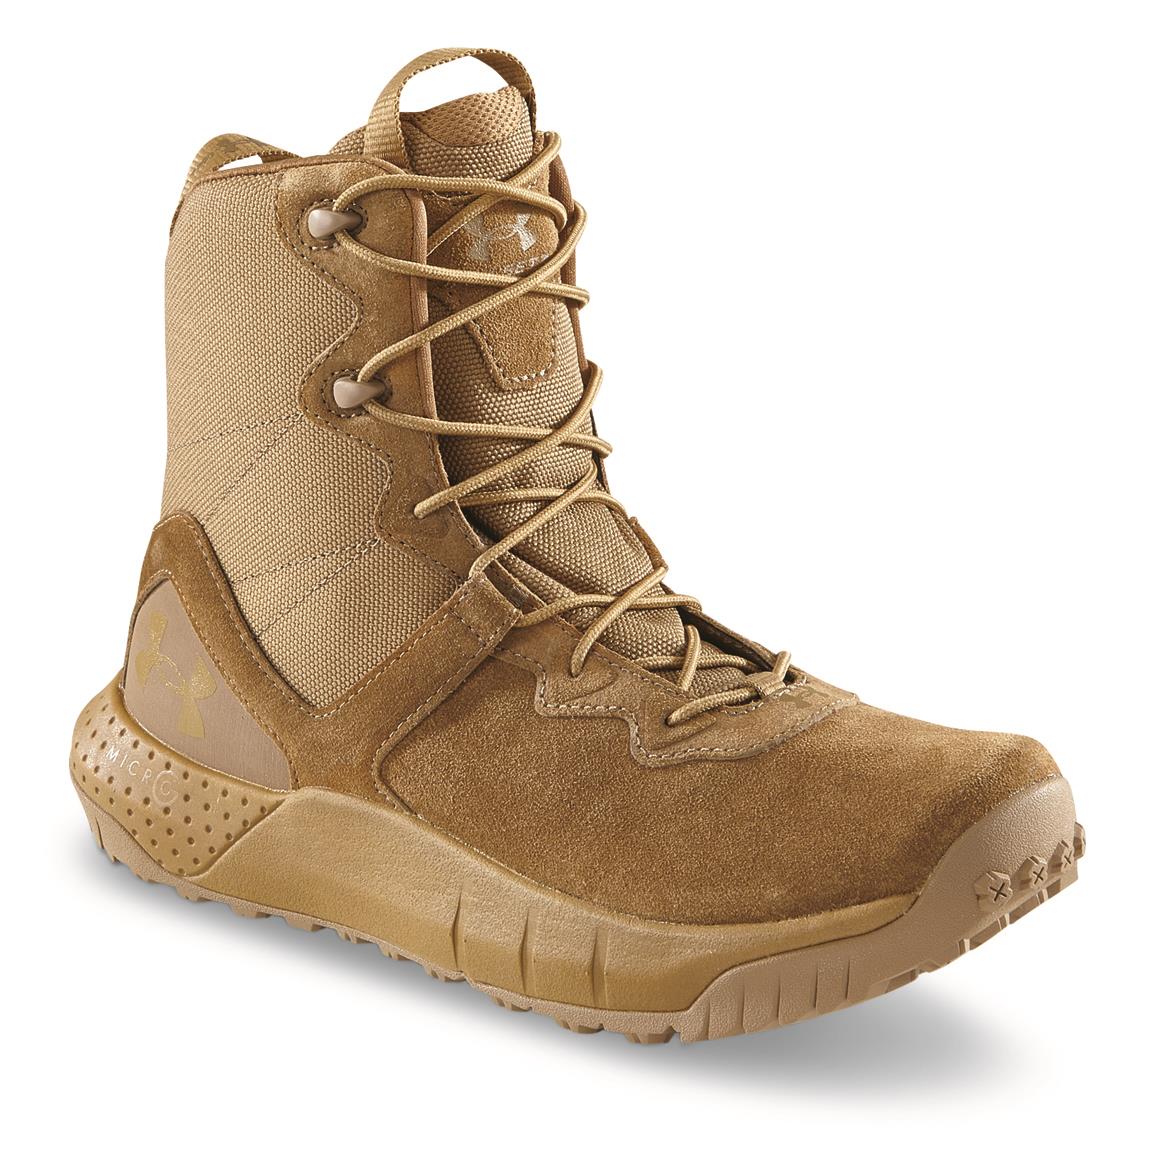 Under Armour Men's Micro G Valsetz 8" Tactical Boots, Coyote Tan, Coyote/coyote/coyote